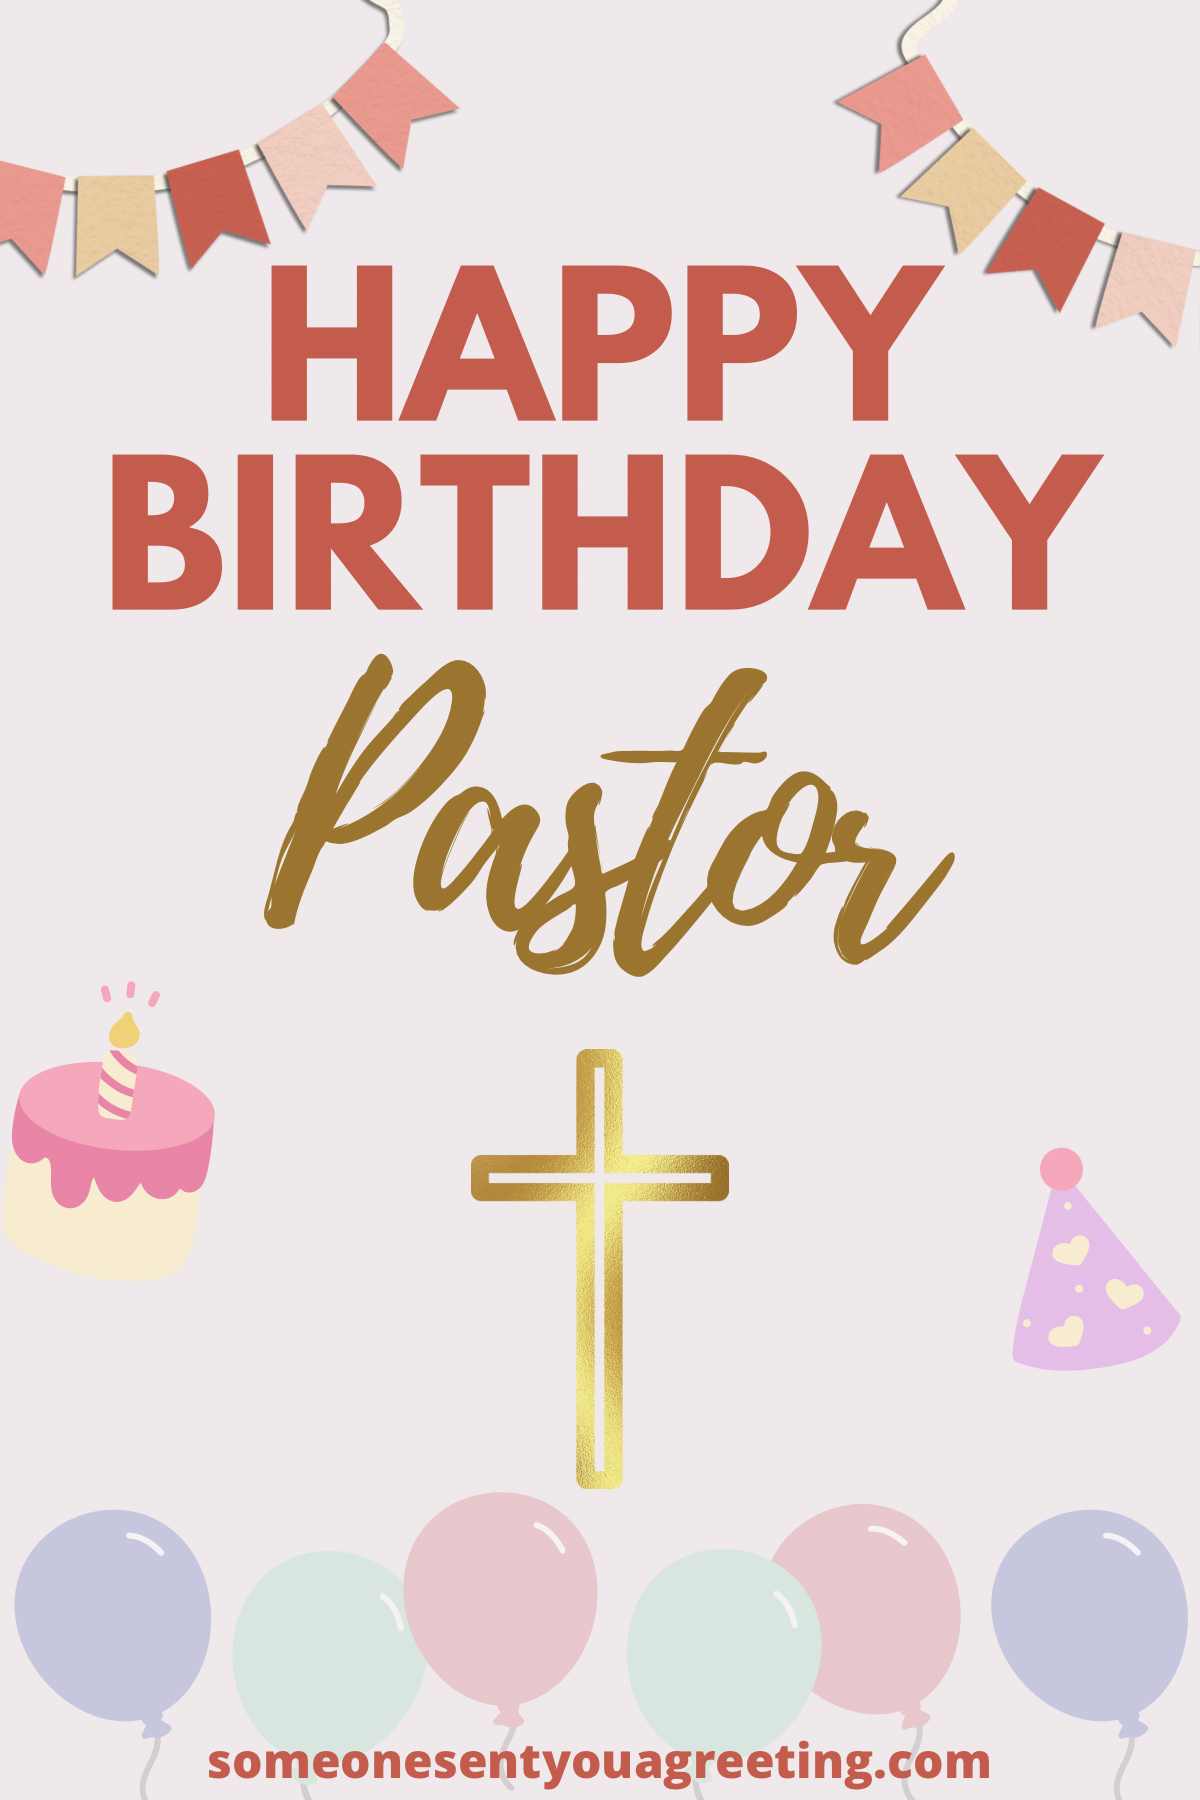 birthday message for a pastor